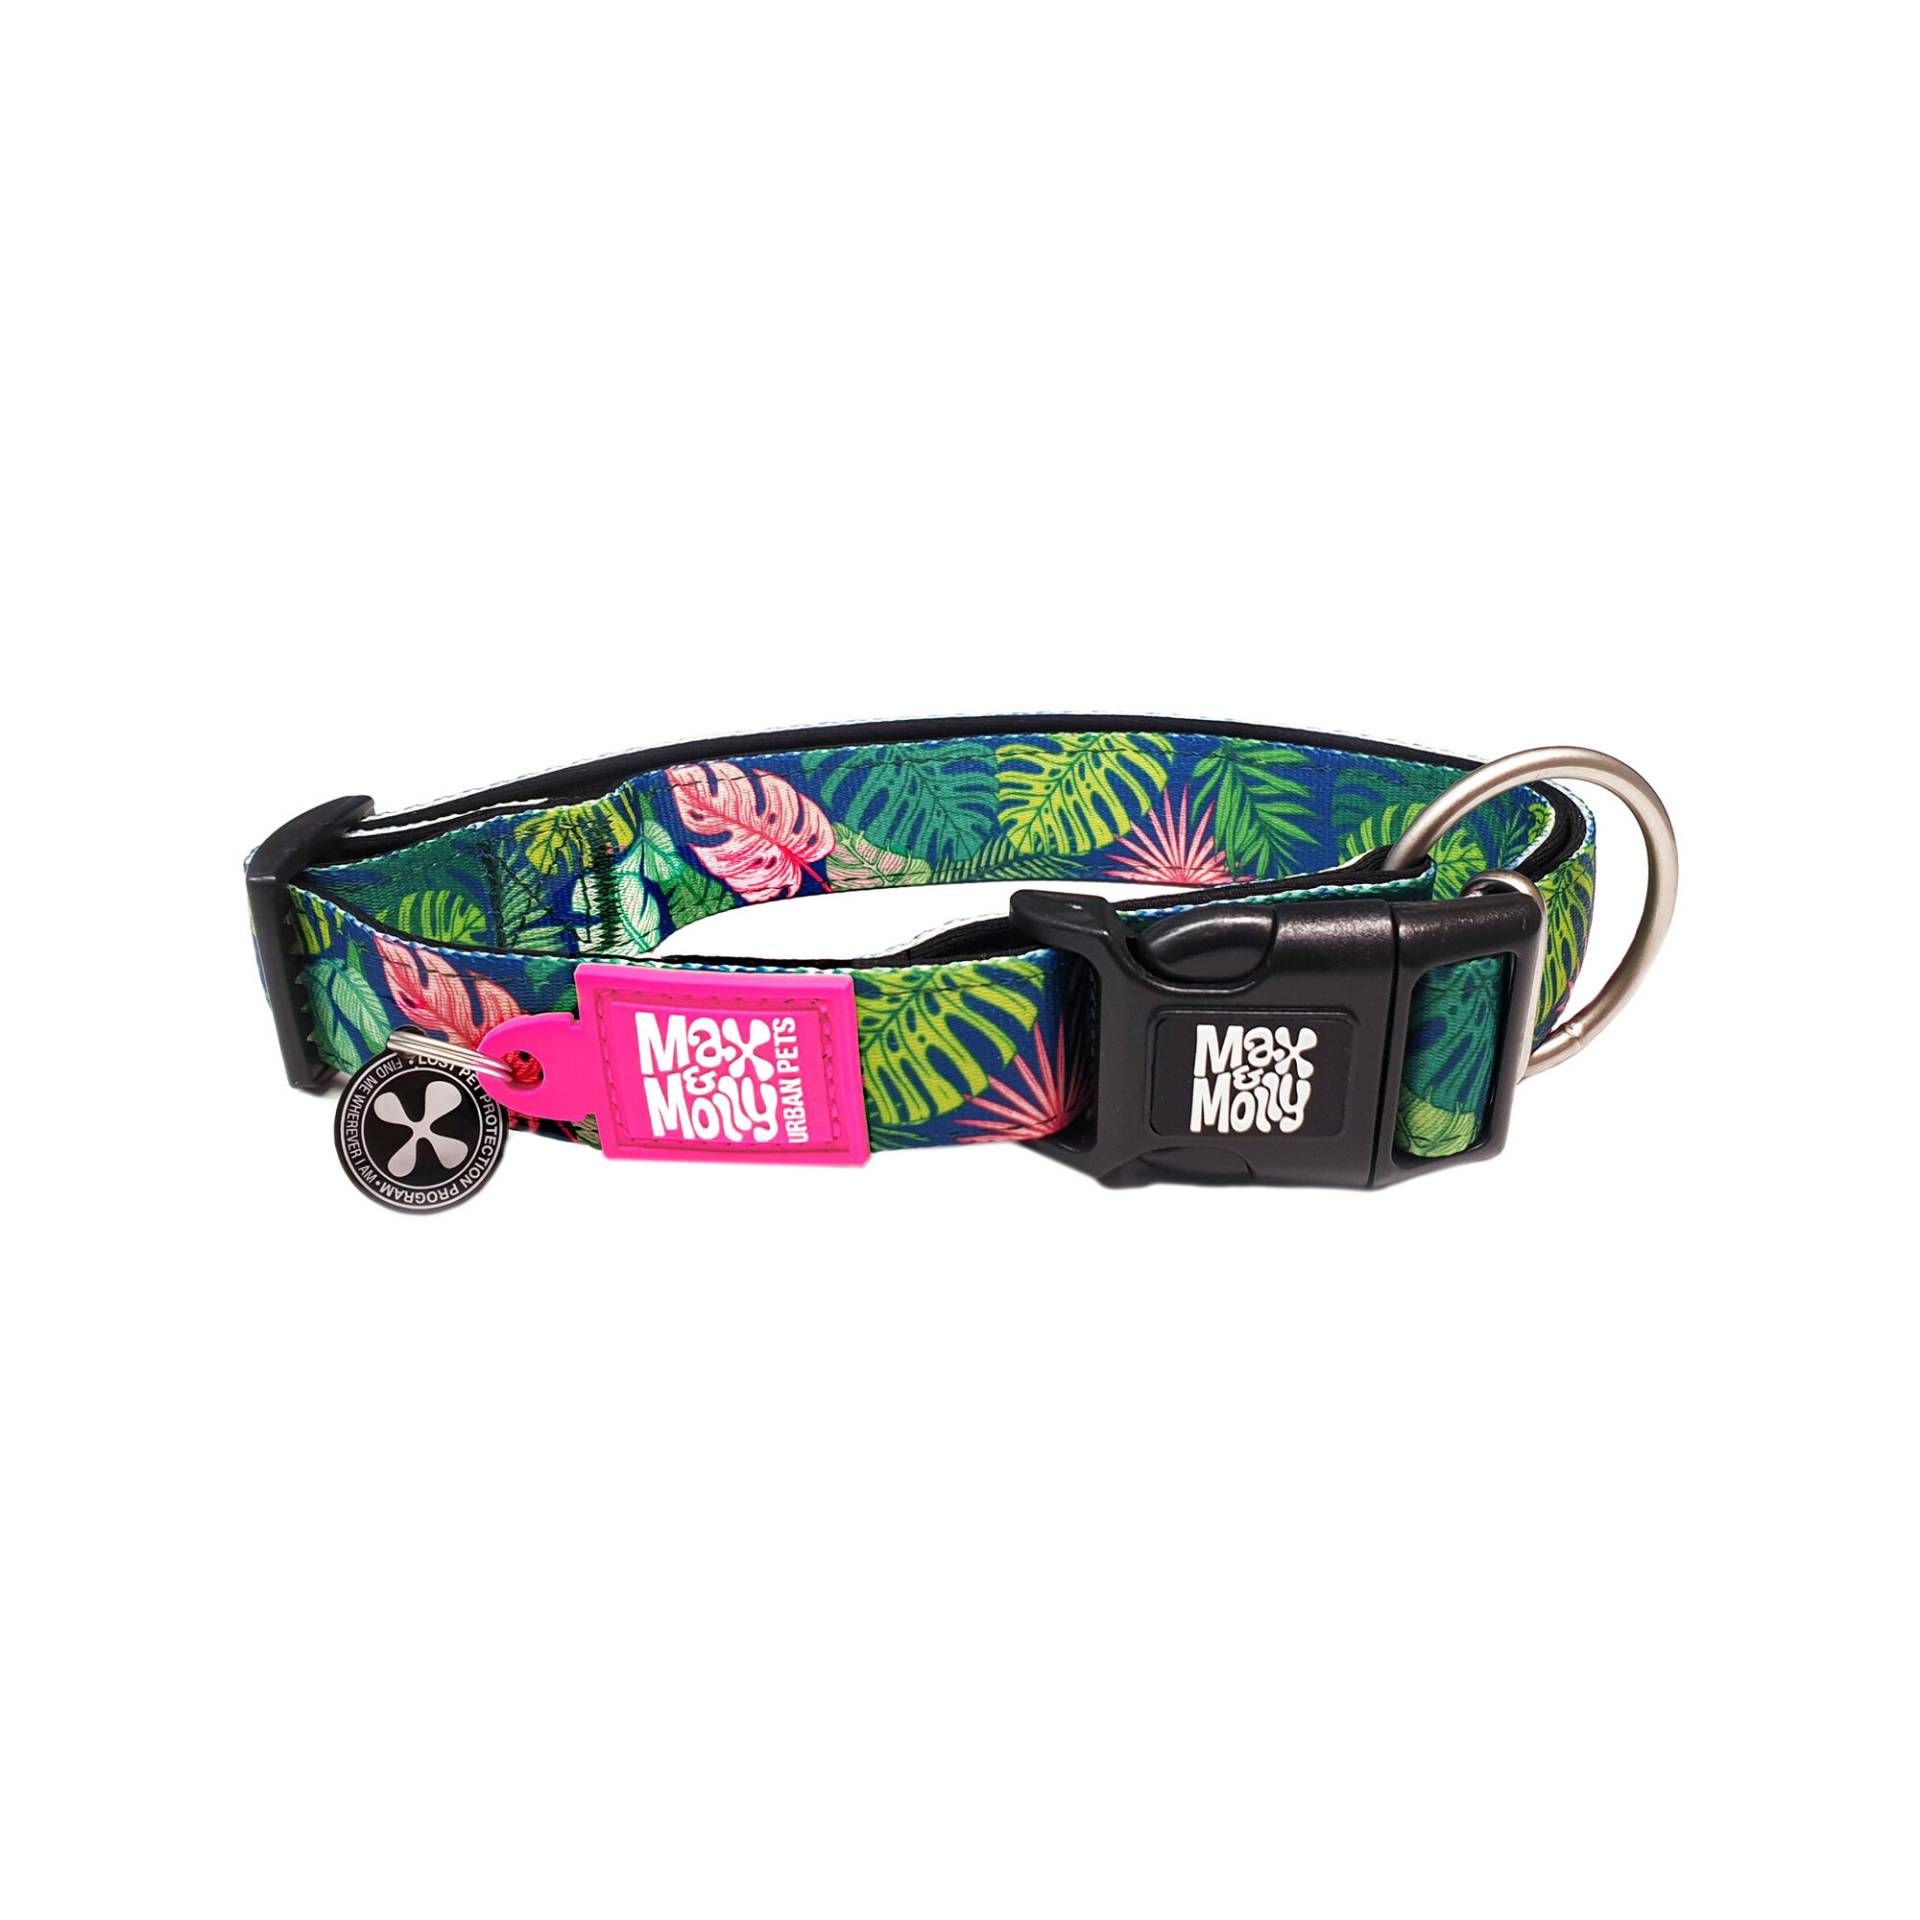 Max & Molly Smart ID Halsband - Tropical - S von Max & Molly